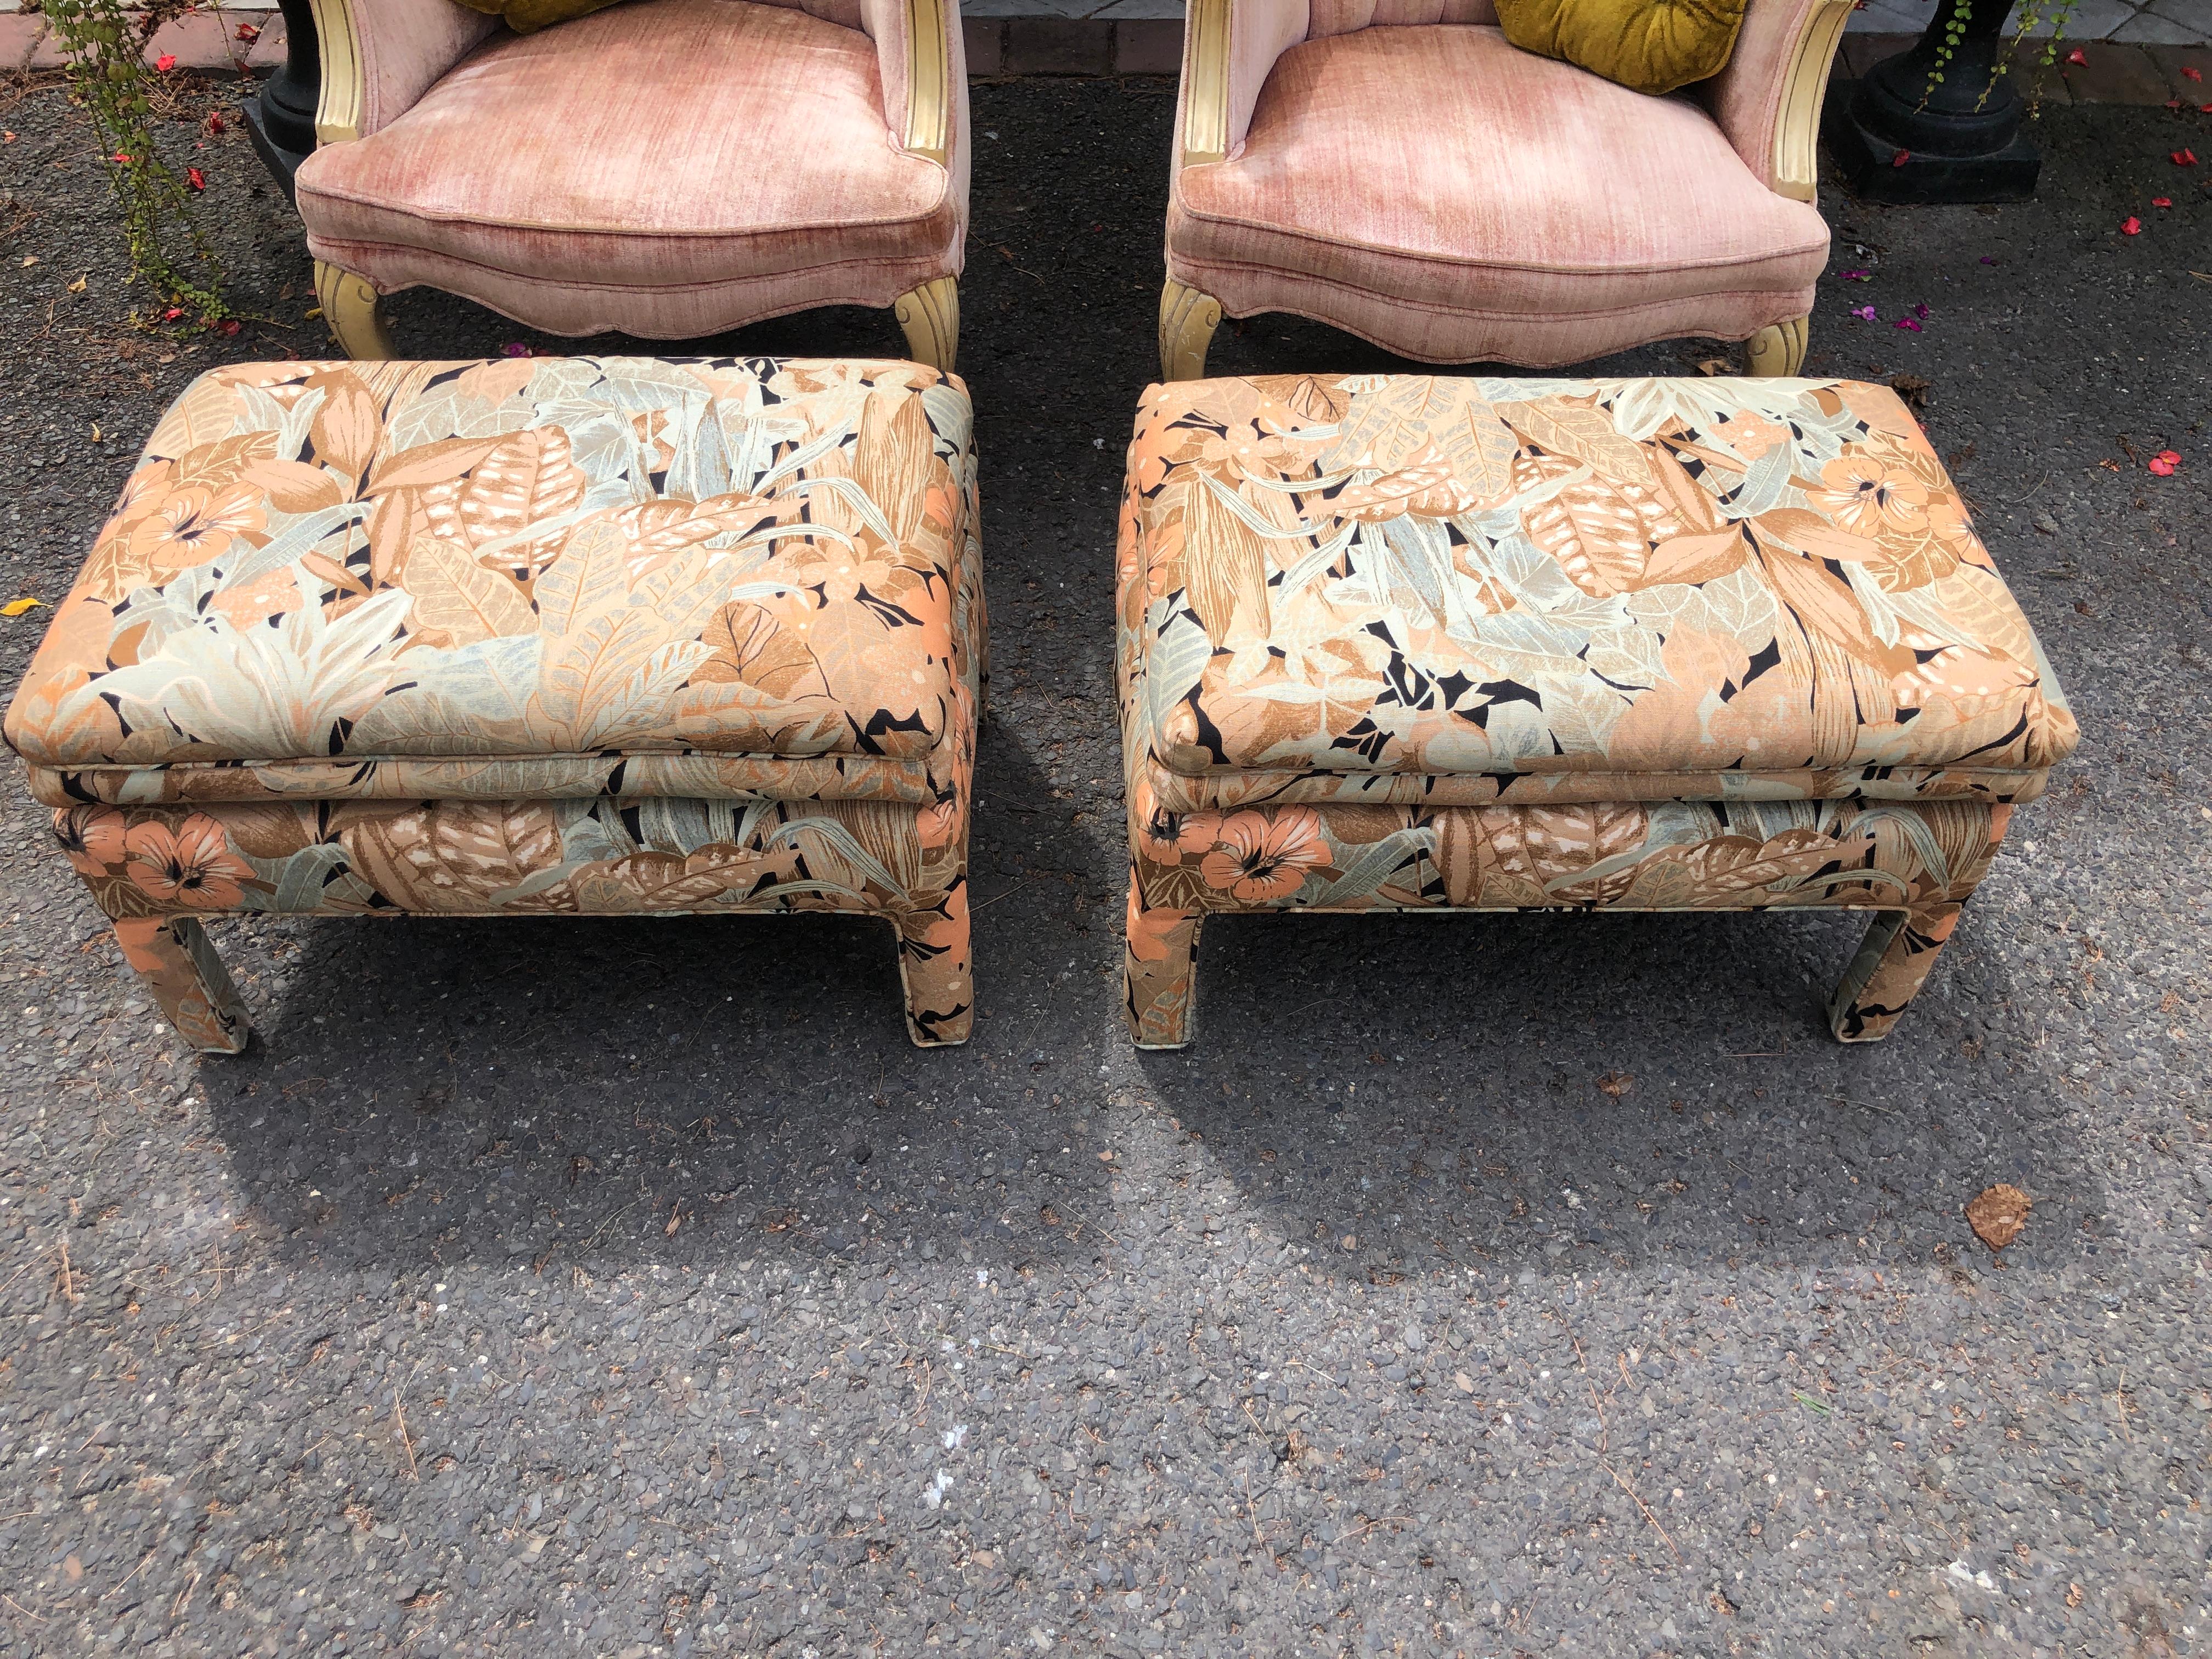 Fantastic pair of upholstered floral linen ottomans. These are in very nice vintage condition with very little wear to their original fabric. The colors are just fabulous with earth tone hues of apricot, brown, and cream. They measure-16